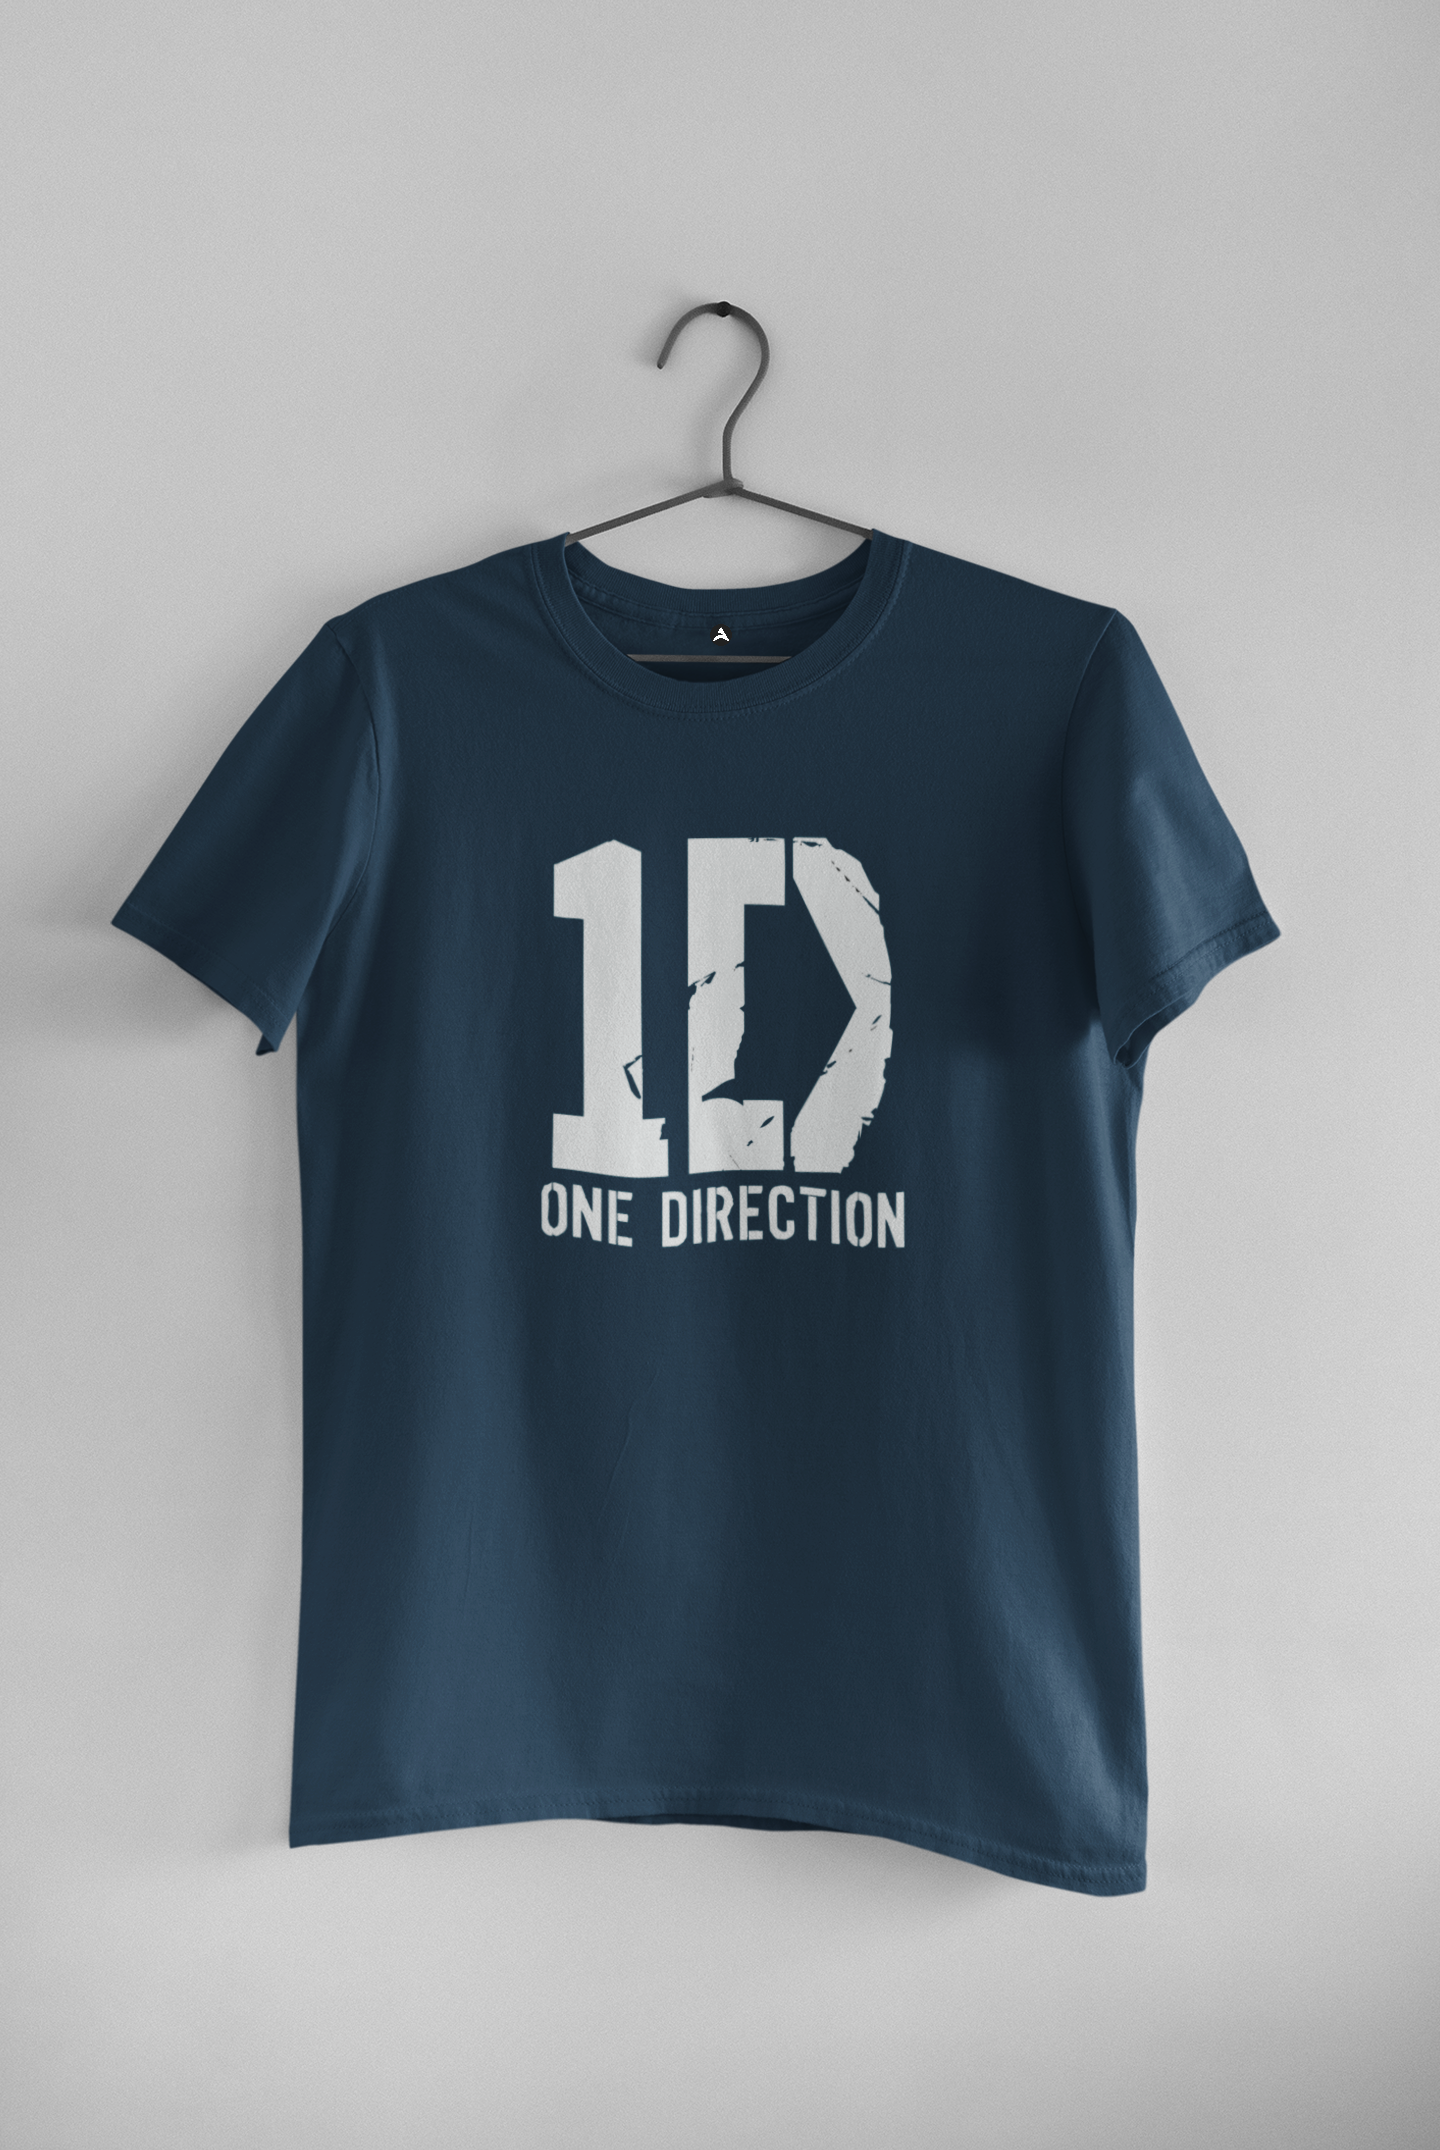 1 Direction: Music and Band- HALF-SLEEVE T-SHIRTS NAVY BLUE